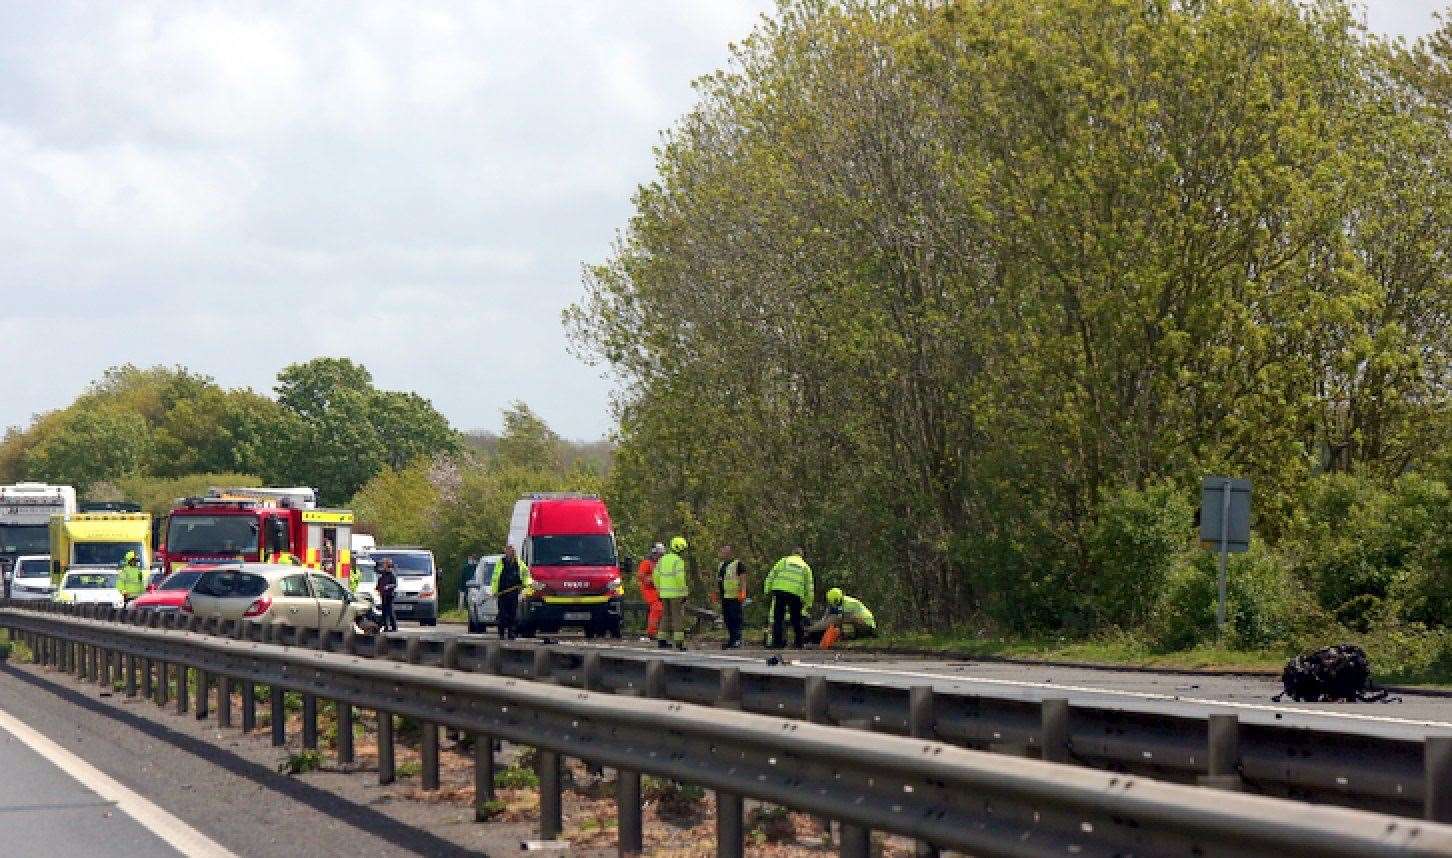 The scene of the accident on the M2. Picture: UKNIP